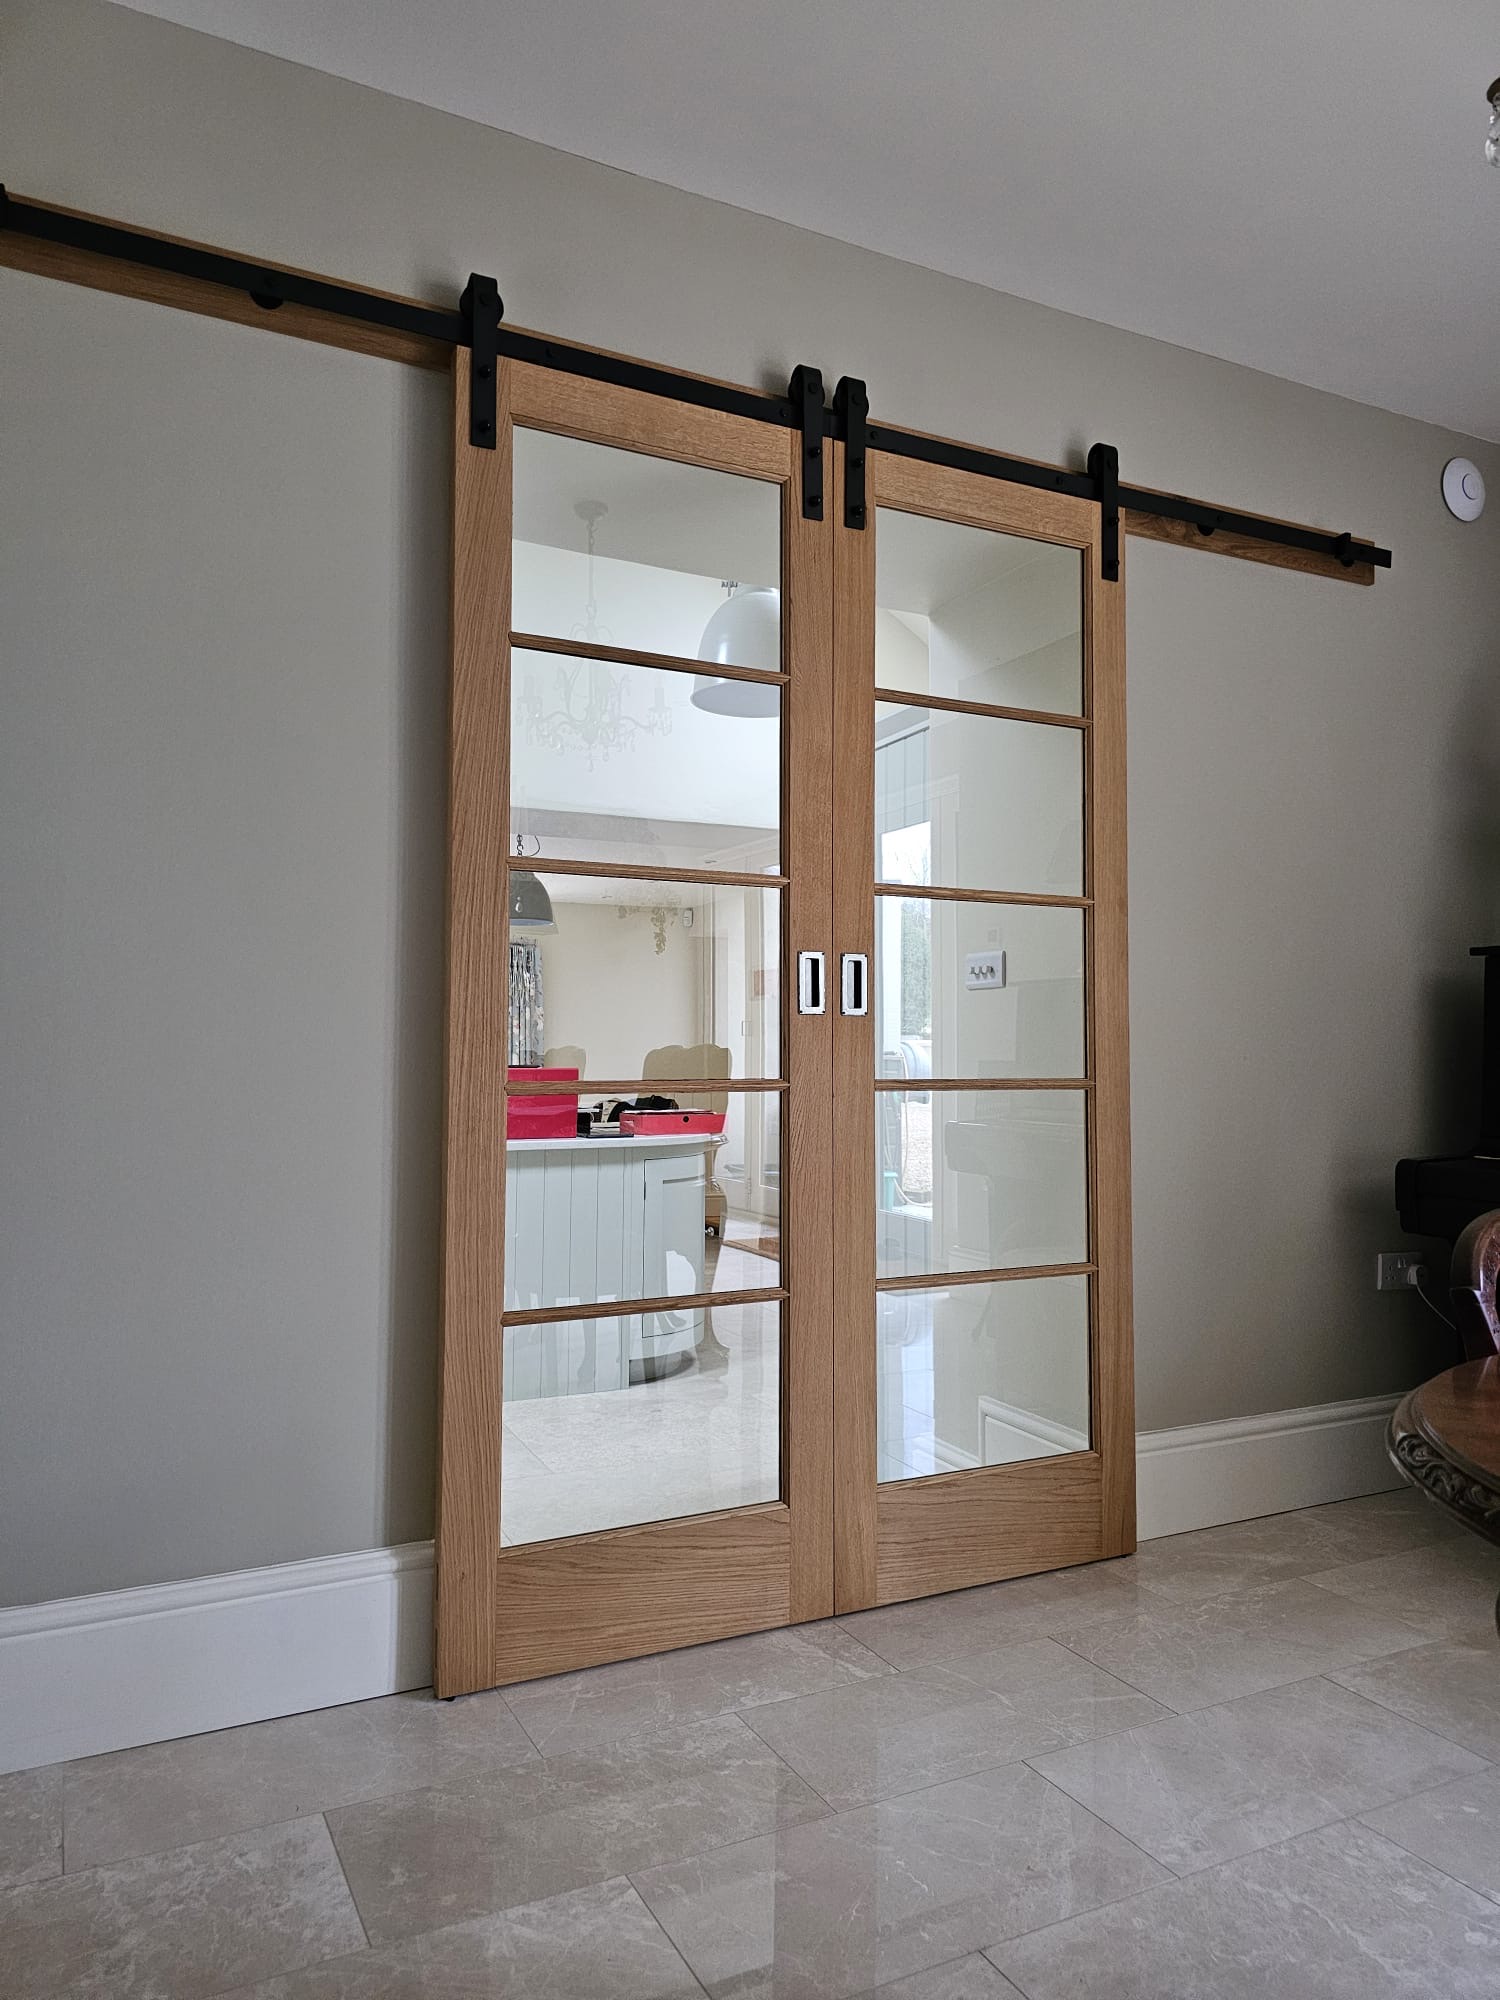 Bespoke timber barn doors by Kings Stag Joinery